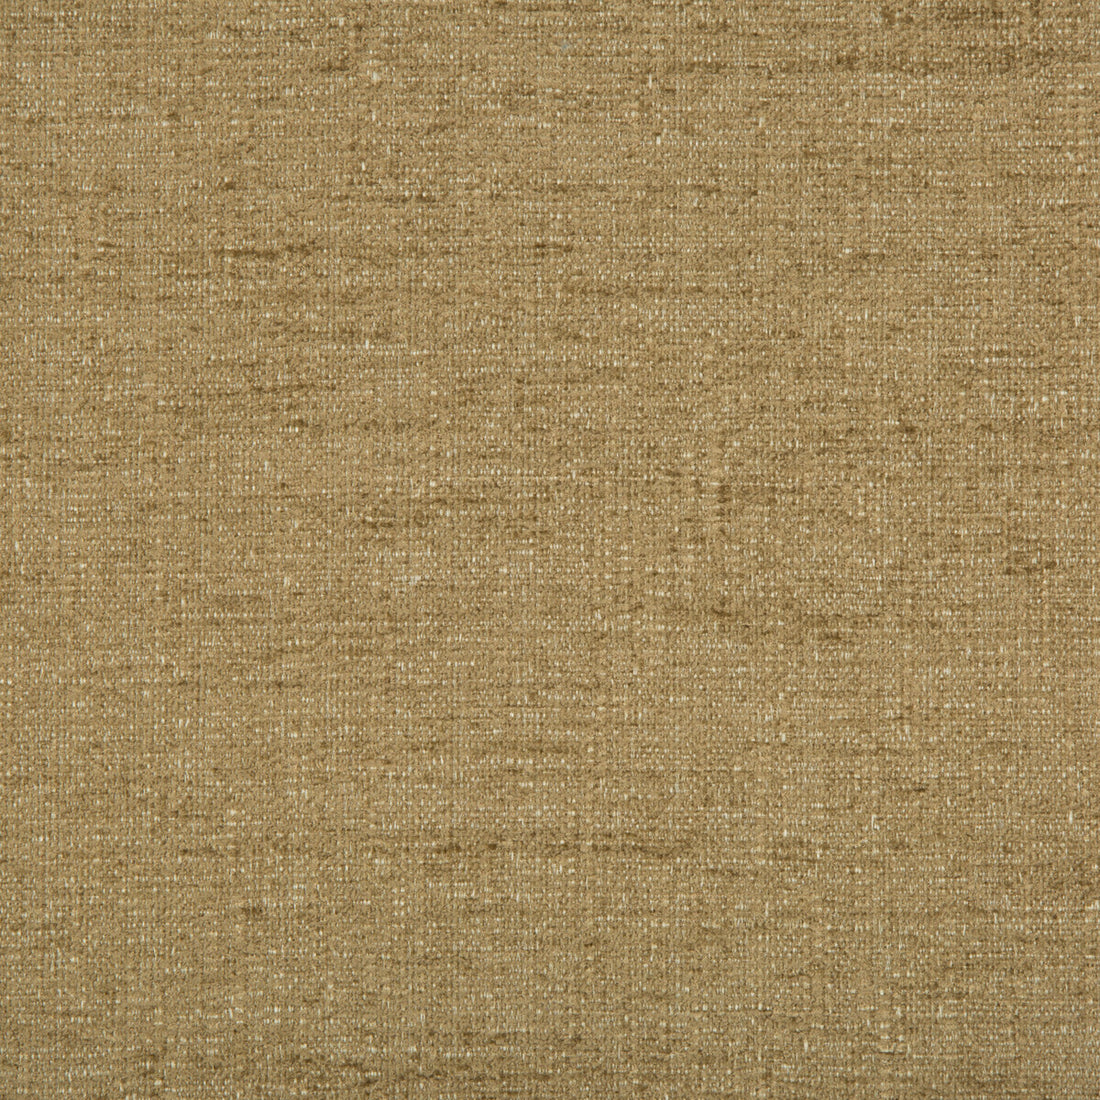 Kravet Smart fabric in 34622-616 color - pattern 34622.616.0 - by Kravet Smart in the Performance Crypton Home collection